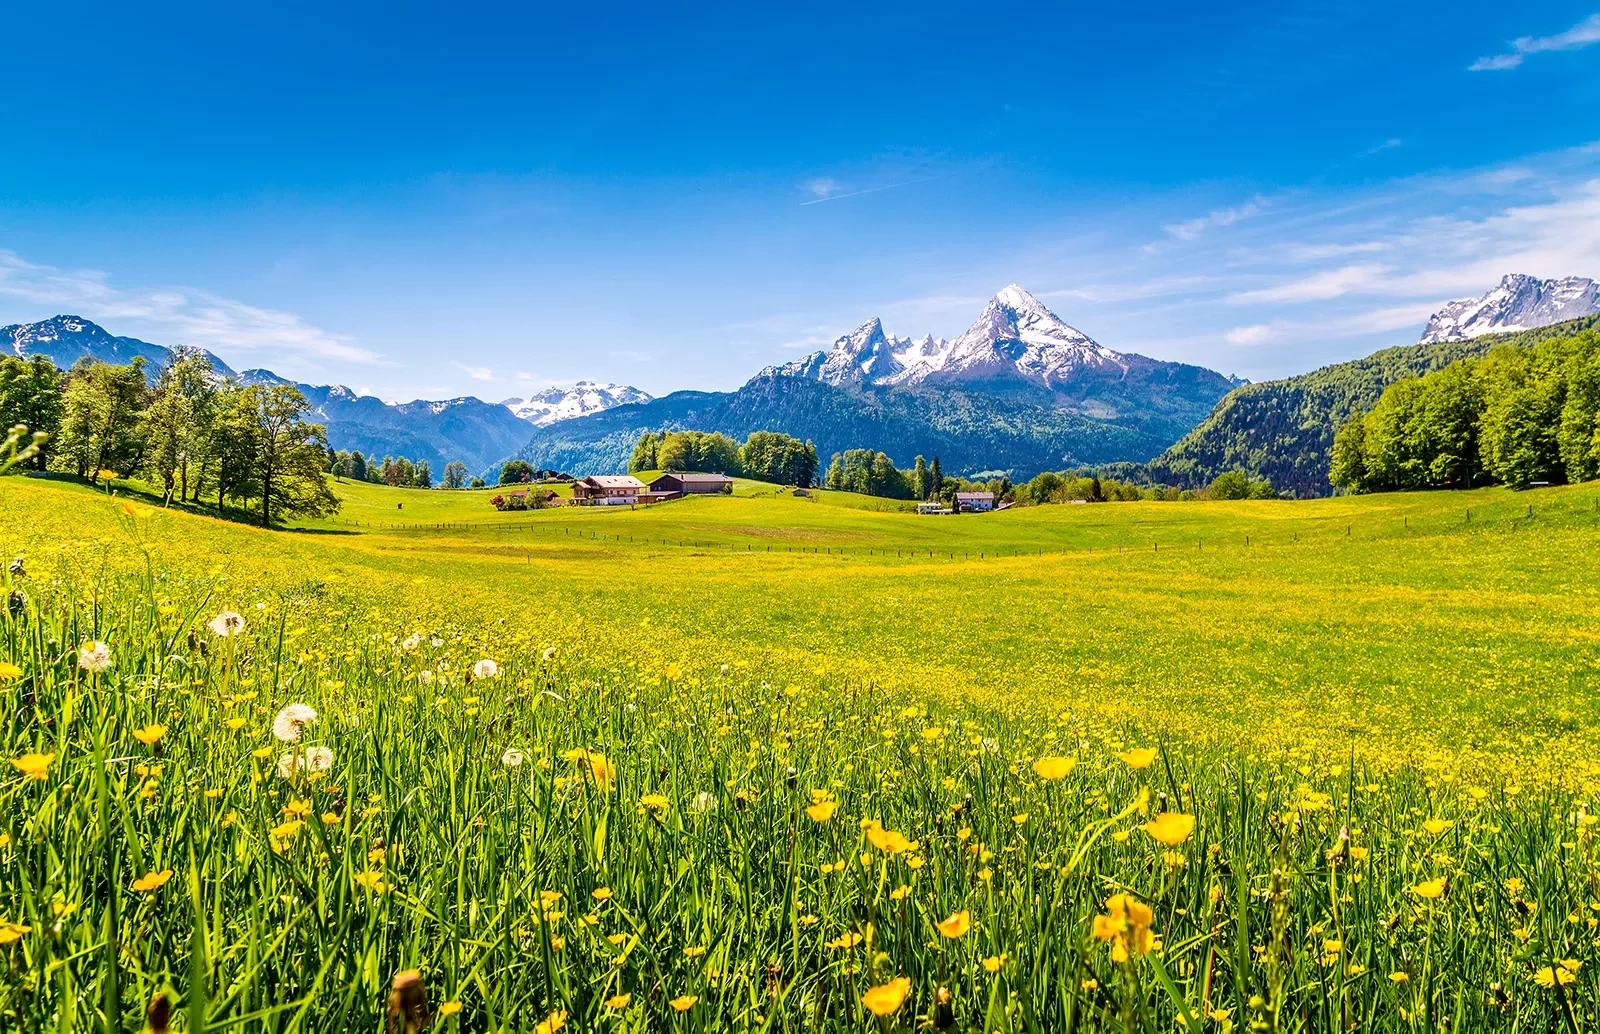 Wide shot of Alpine vista, yellow flowers, snowy peaks, small cottages.